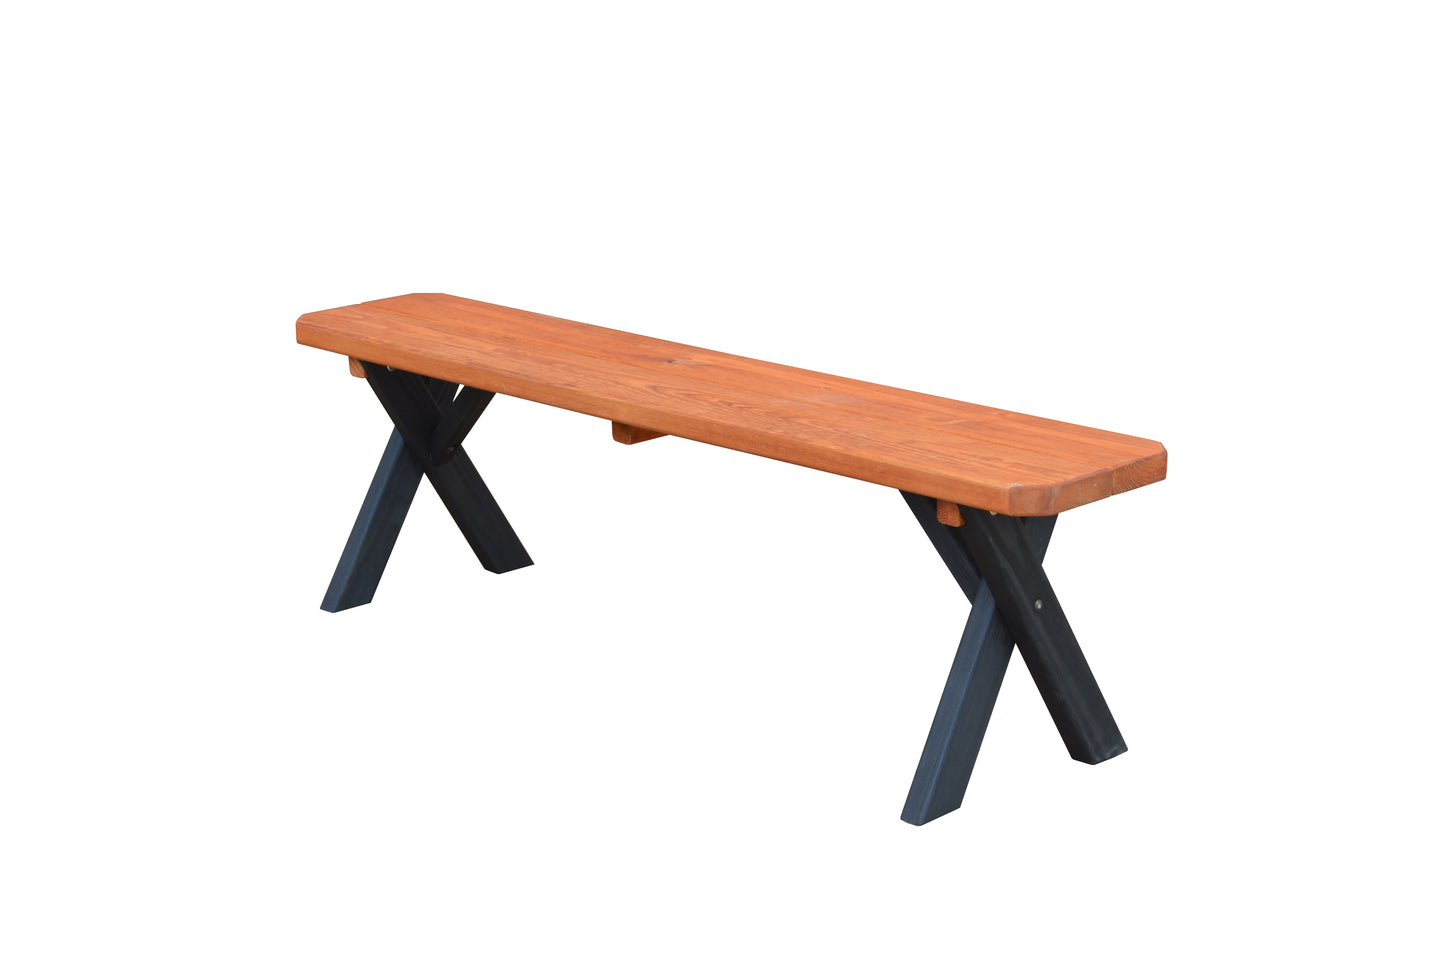 A&L Furniture Co. Pressure Treated Pine 5" Crossleg Bench Only Redwood on Black - LEAD TIME TO SHIP 10 BUSINESS DAYS